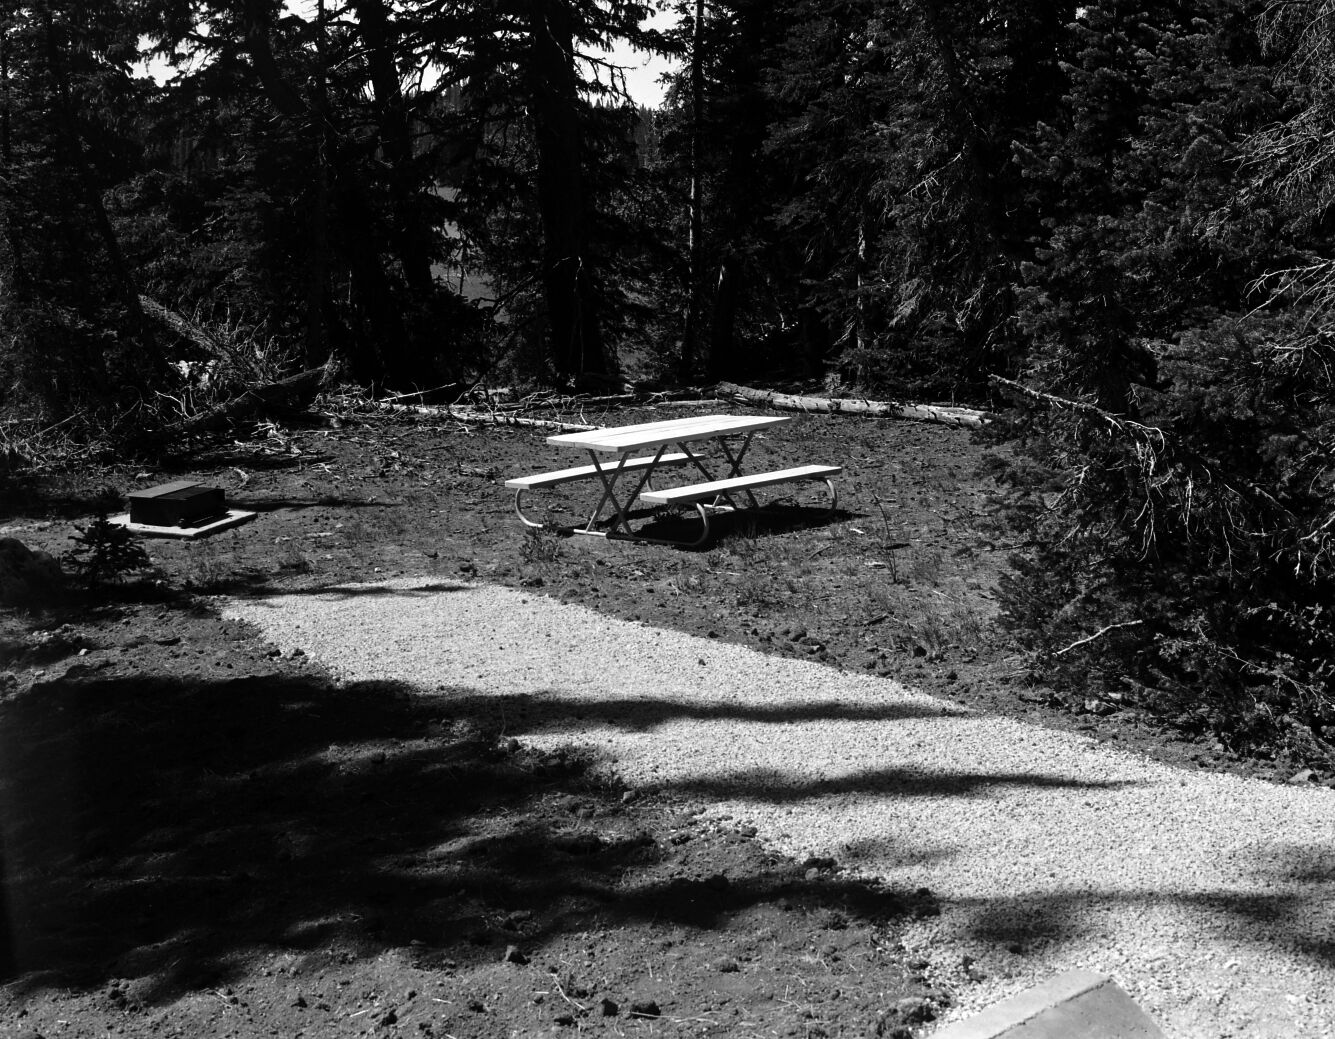 A completed campsite with firepit and picnic table, Cedar Breaks National Monument campground.